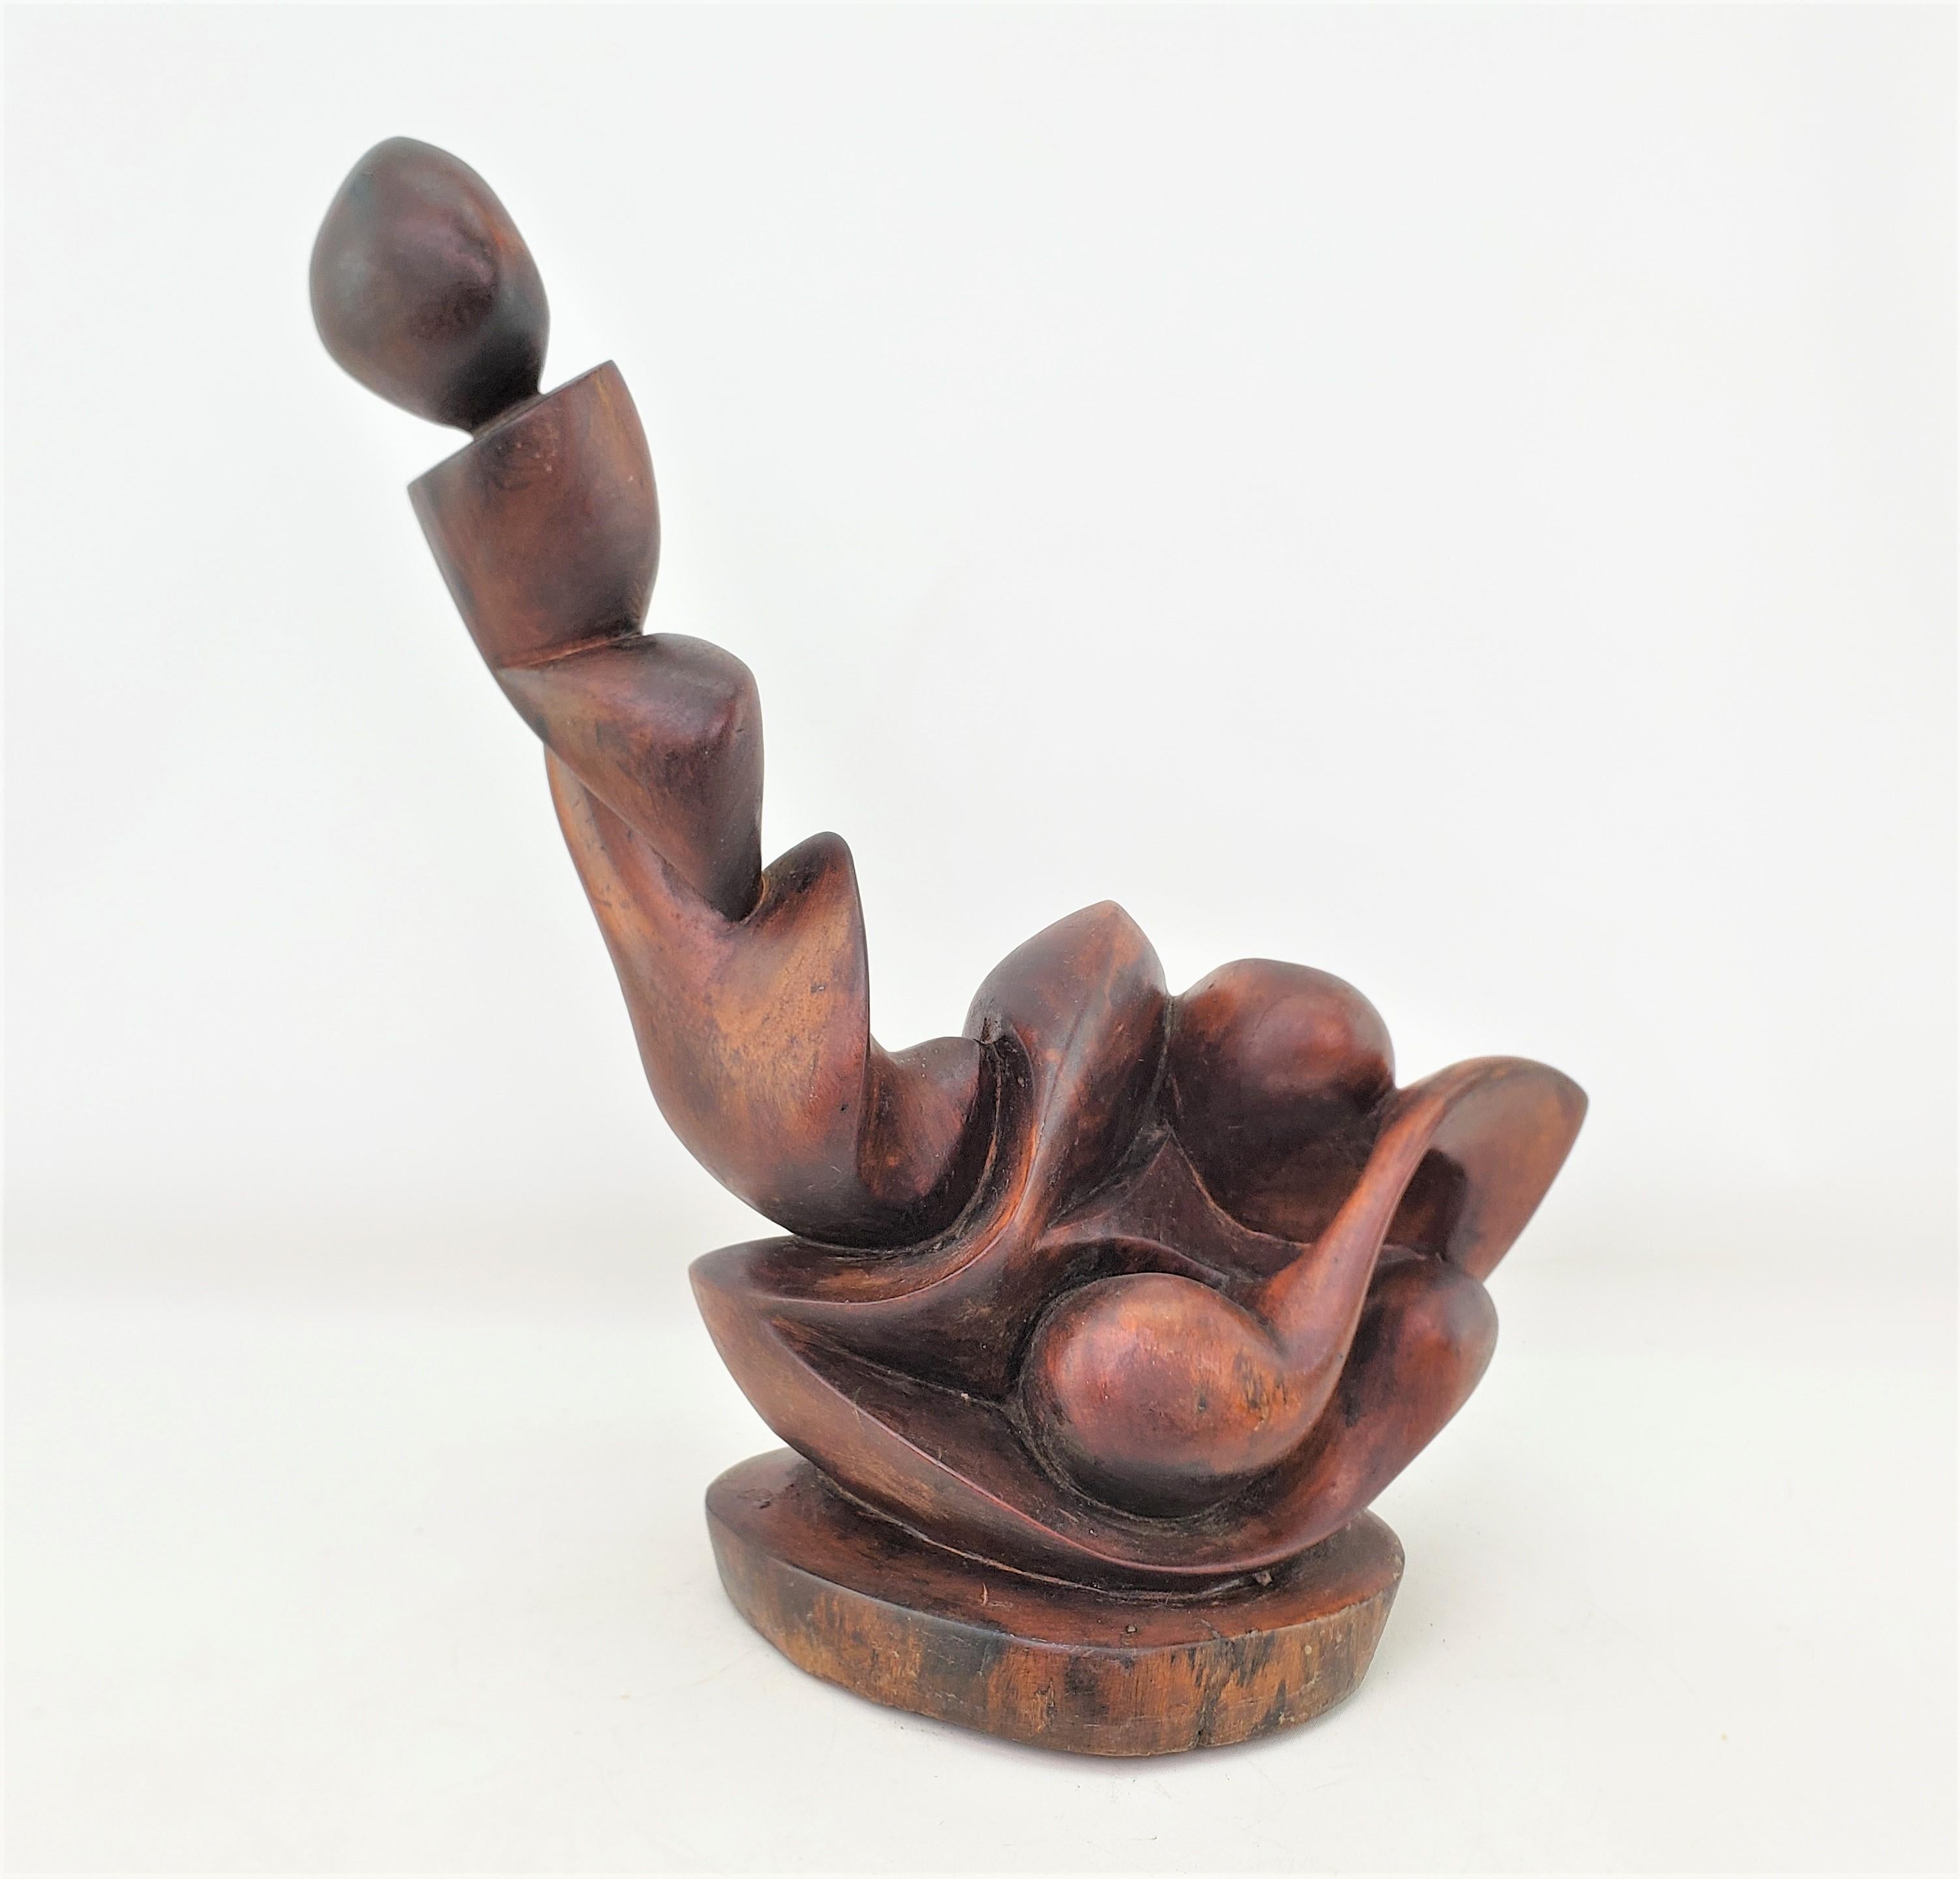 This hand carved wooden sculpture is unsigned, but presumed to have originated from the United States and date to approximately 1969 and done in the period Mid-Century Modern style. The sculpture is composed of walnut on a pine base and is hand